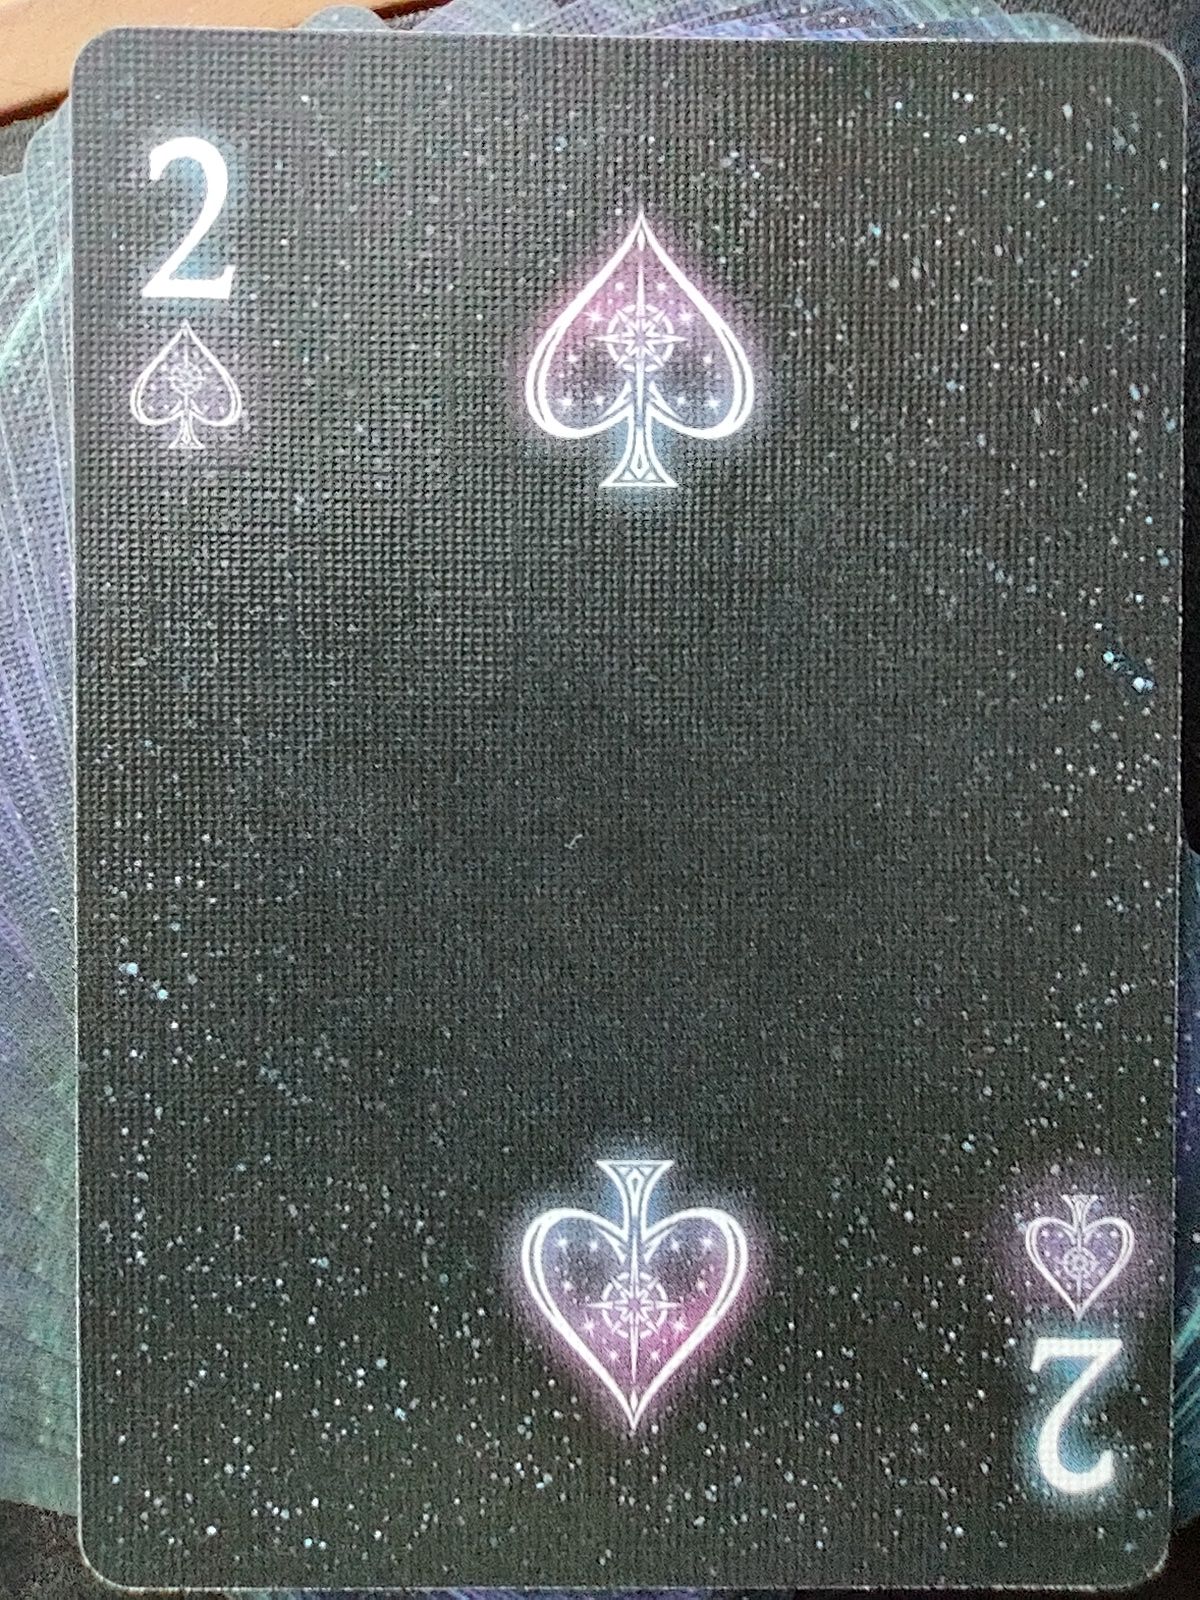 2 of spades. From the Bicycle Stargazer deck.